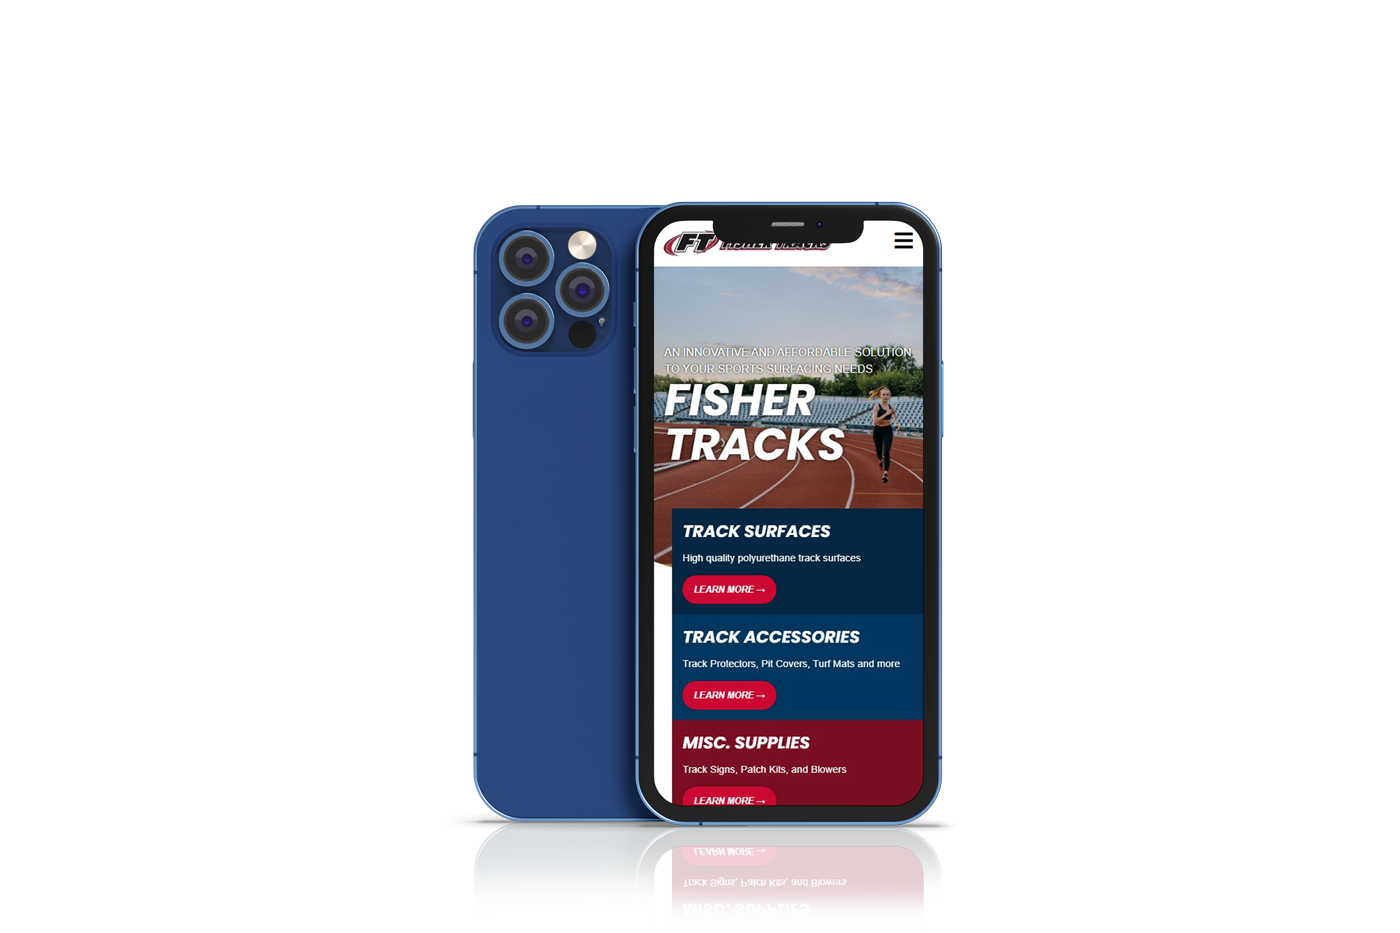 Mockup showing mobile view of the Fisher Tracks website